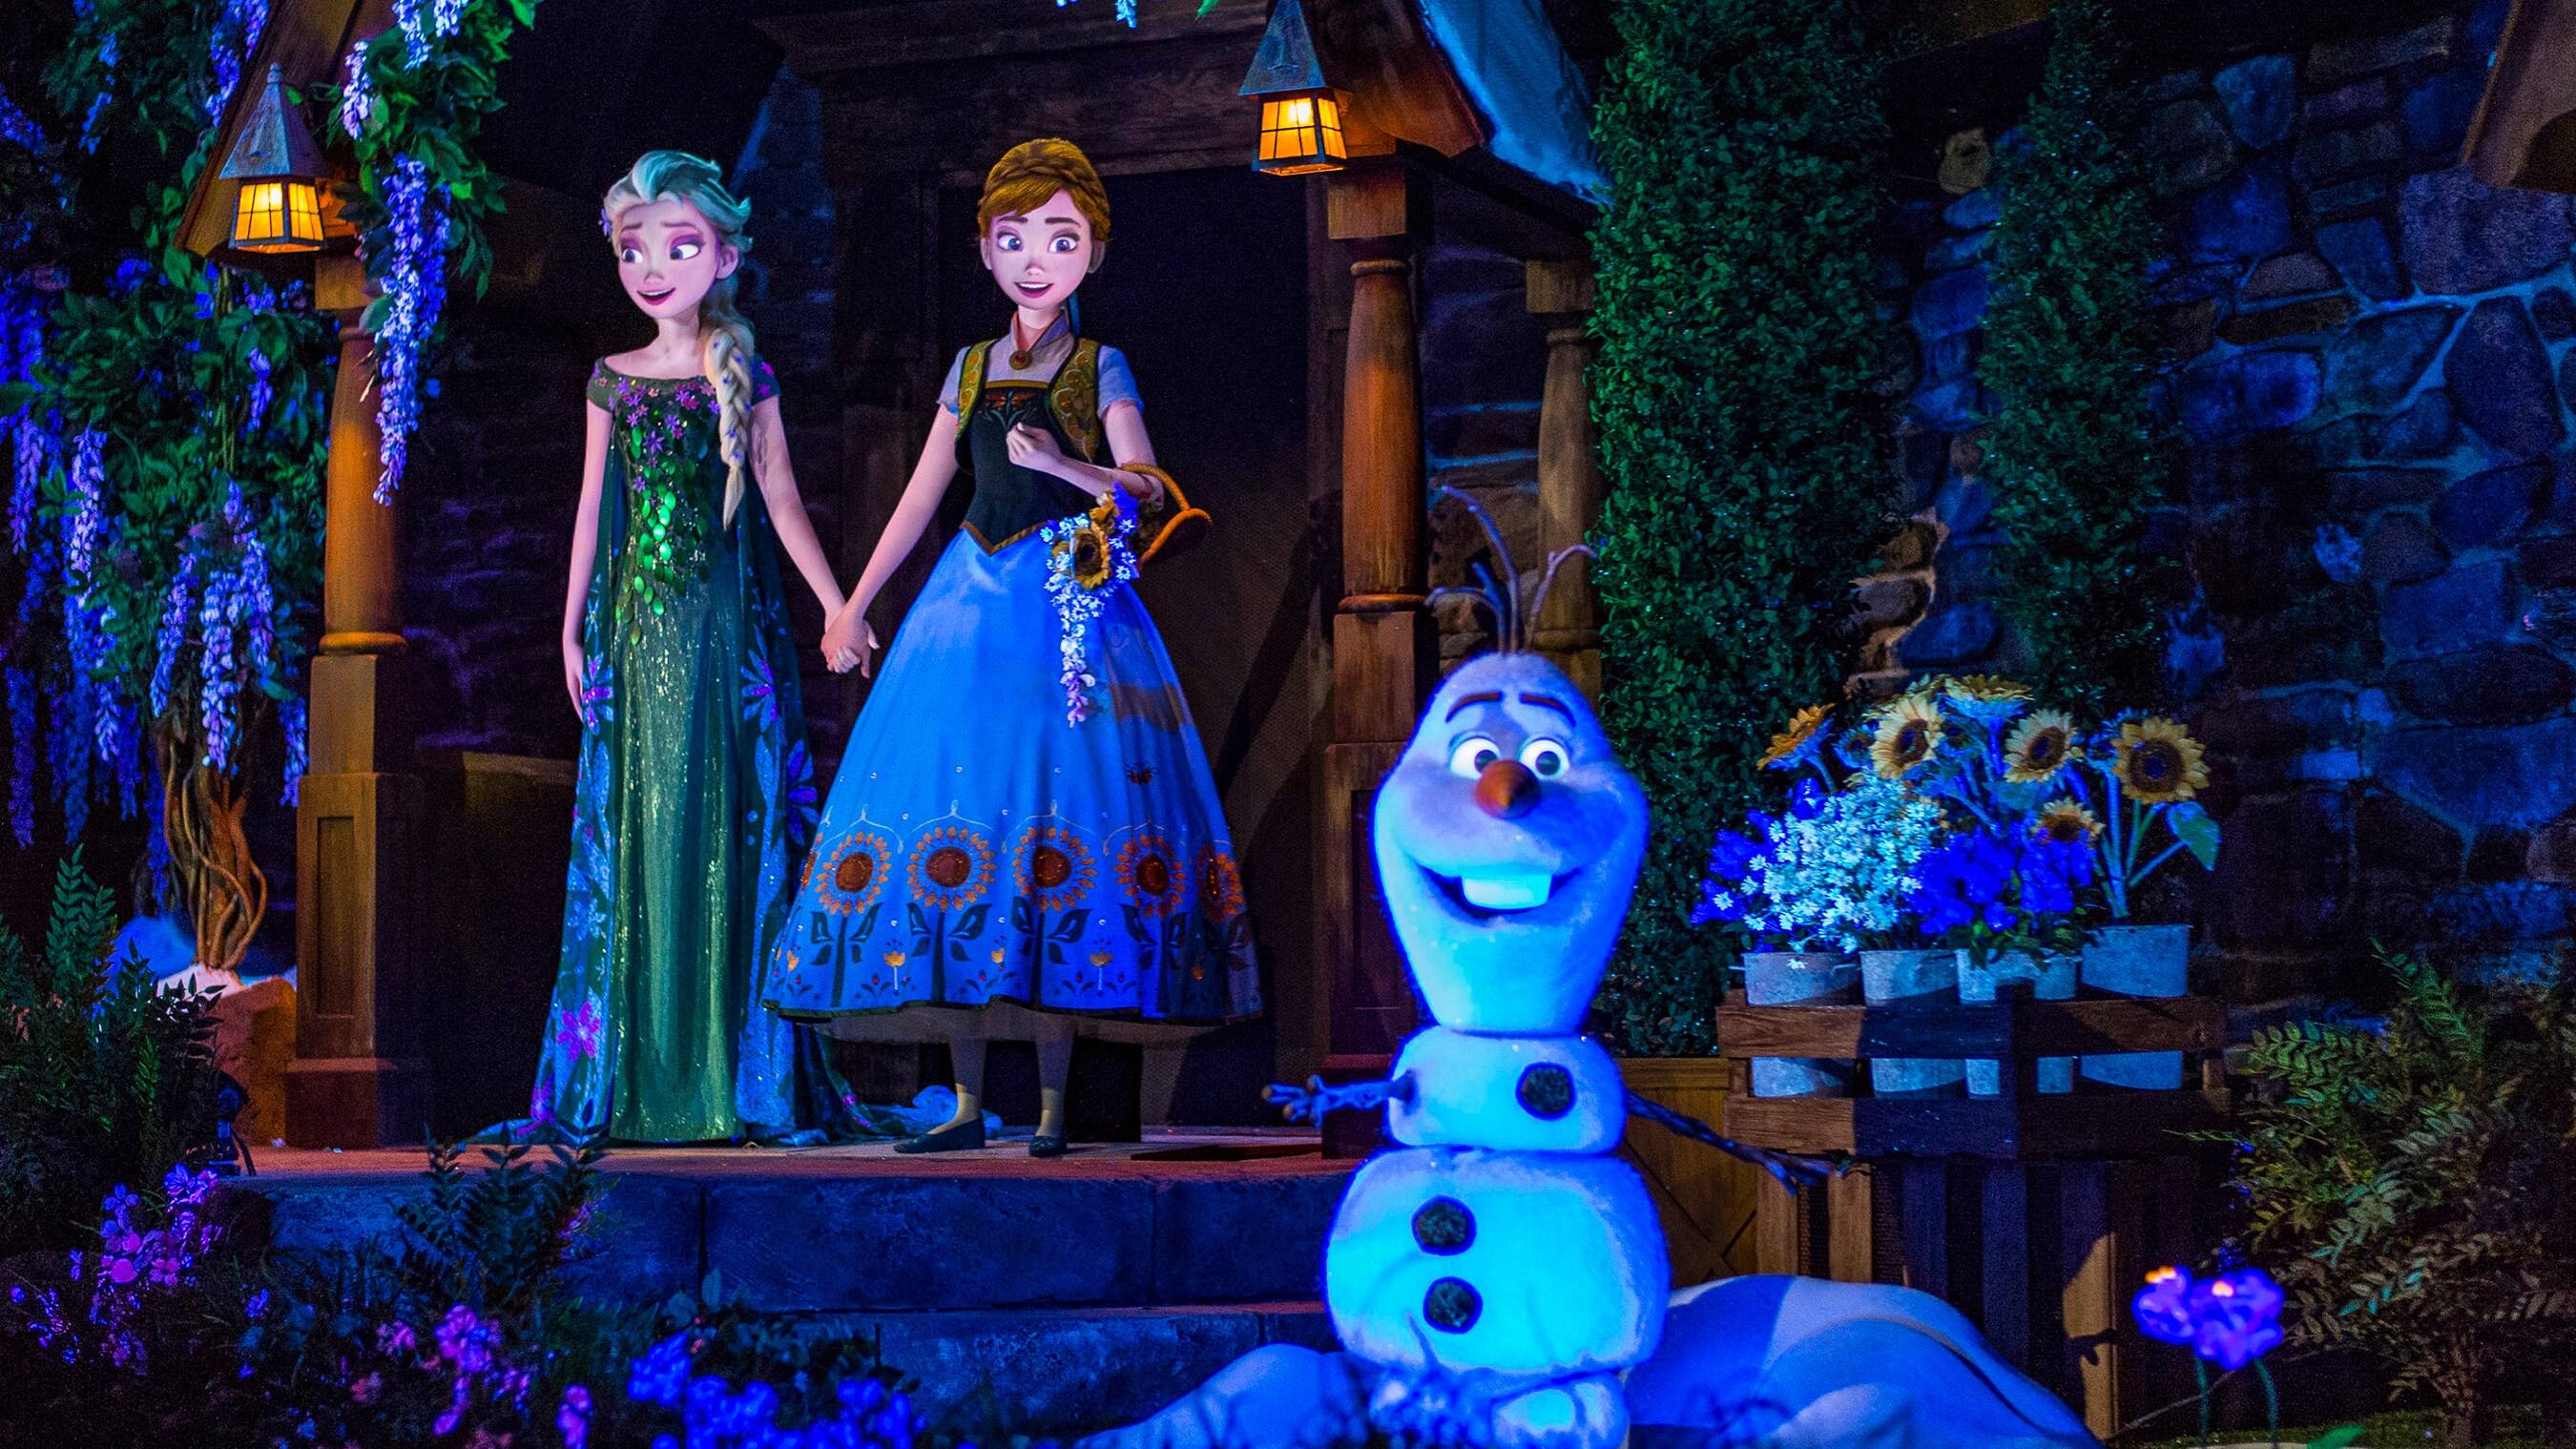 Frozen Ever After to open June 21 at Epcot